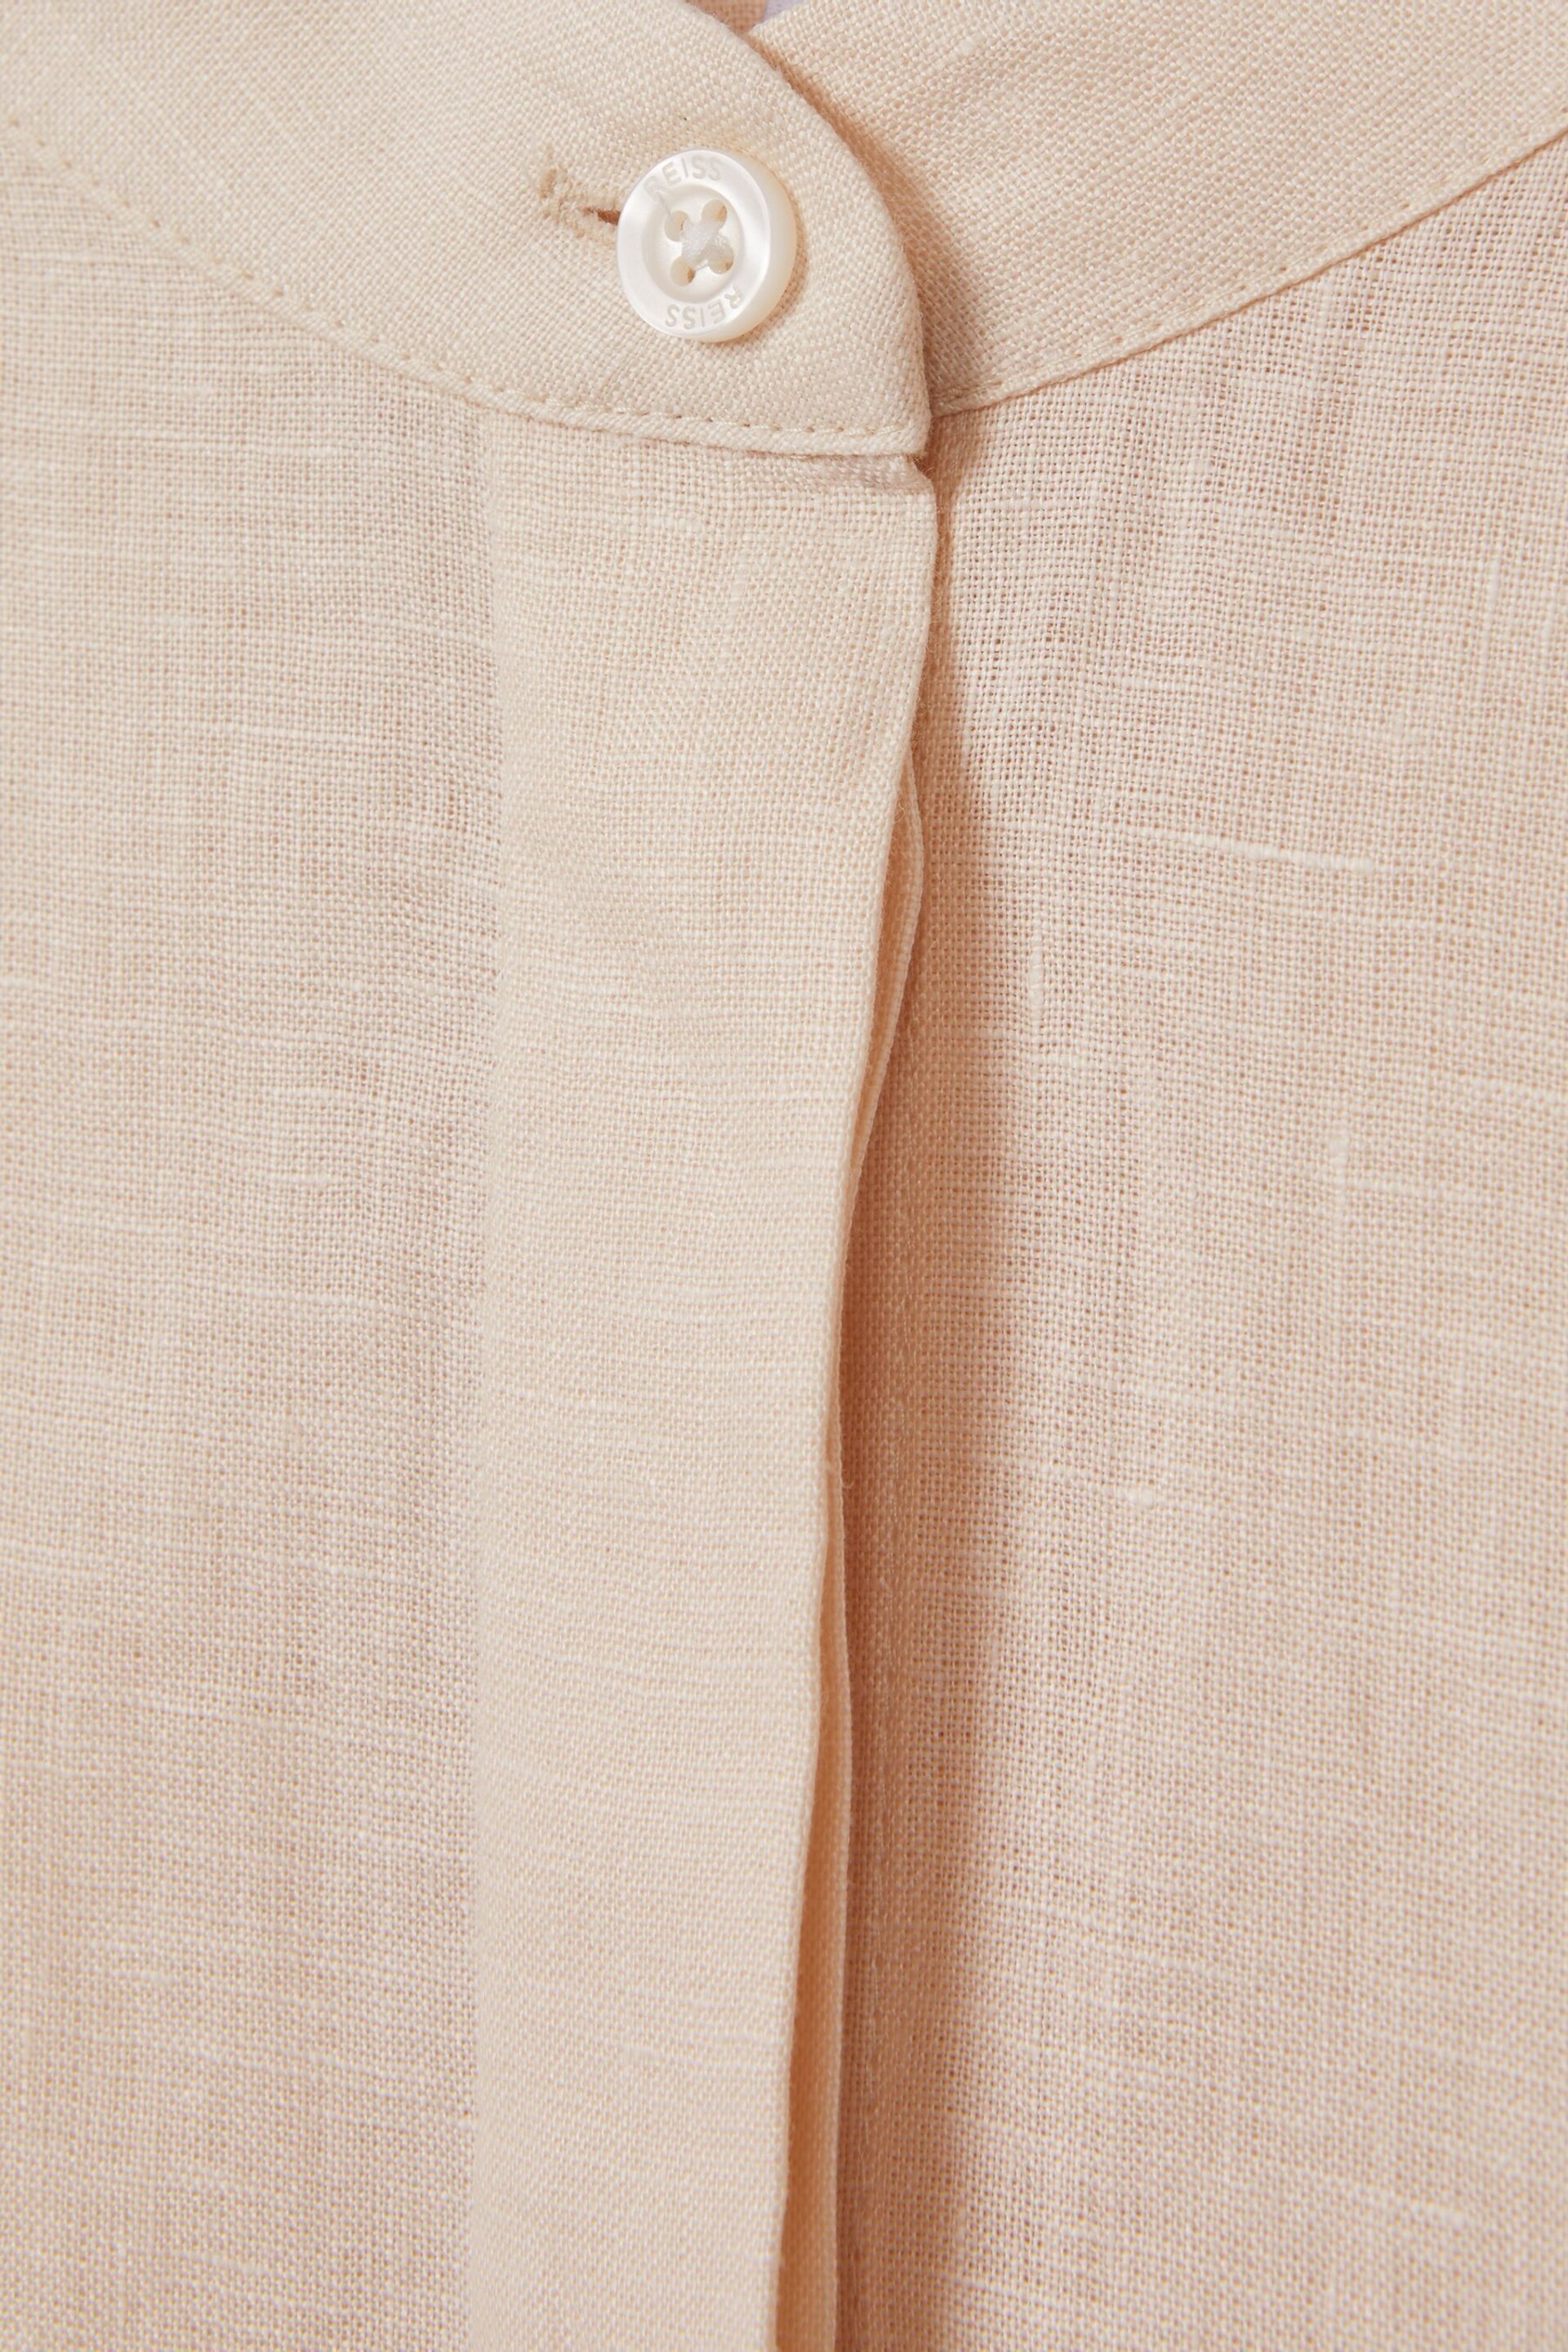 Reiss Blush Winona Relaxed Sleeve Linen Shirt - Image 6 of 6